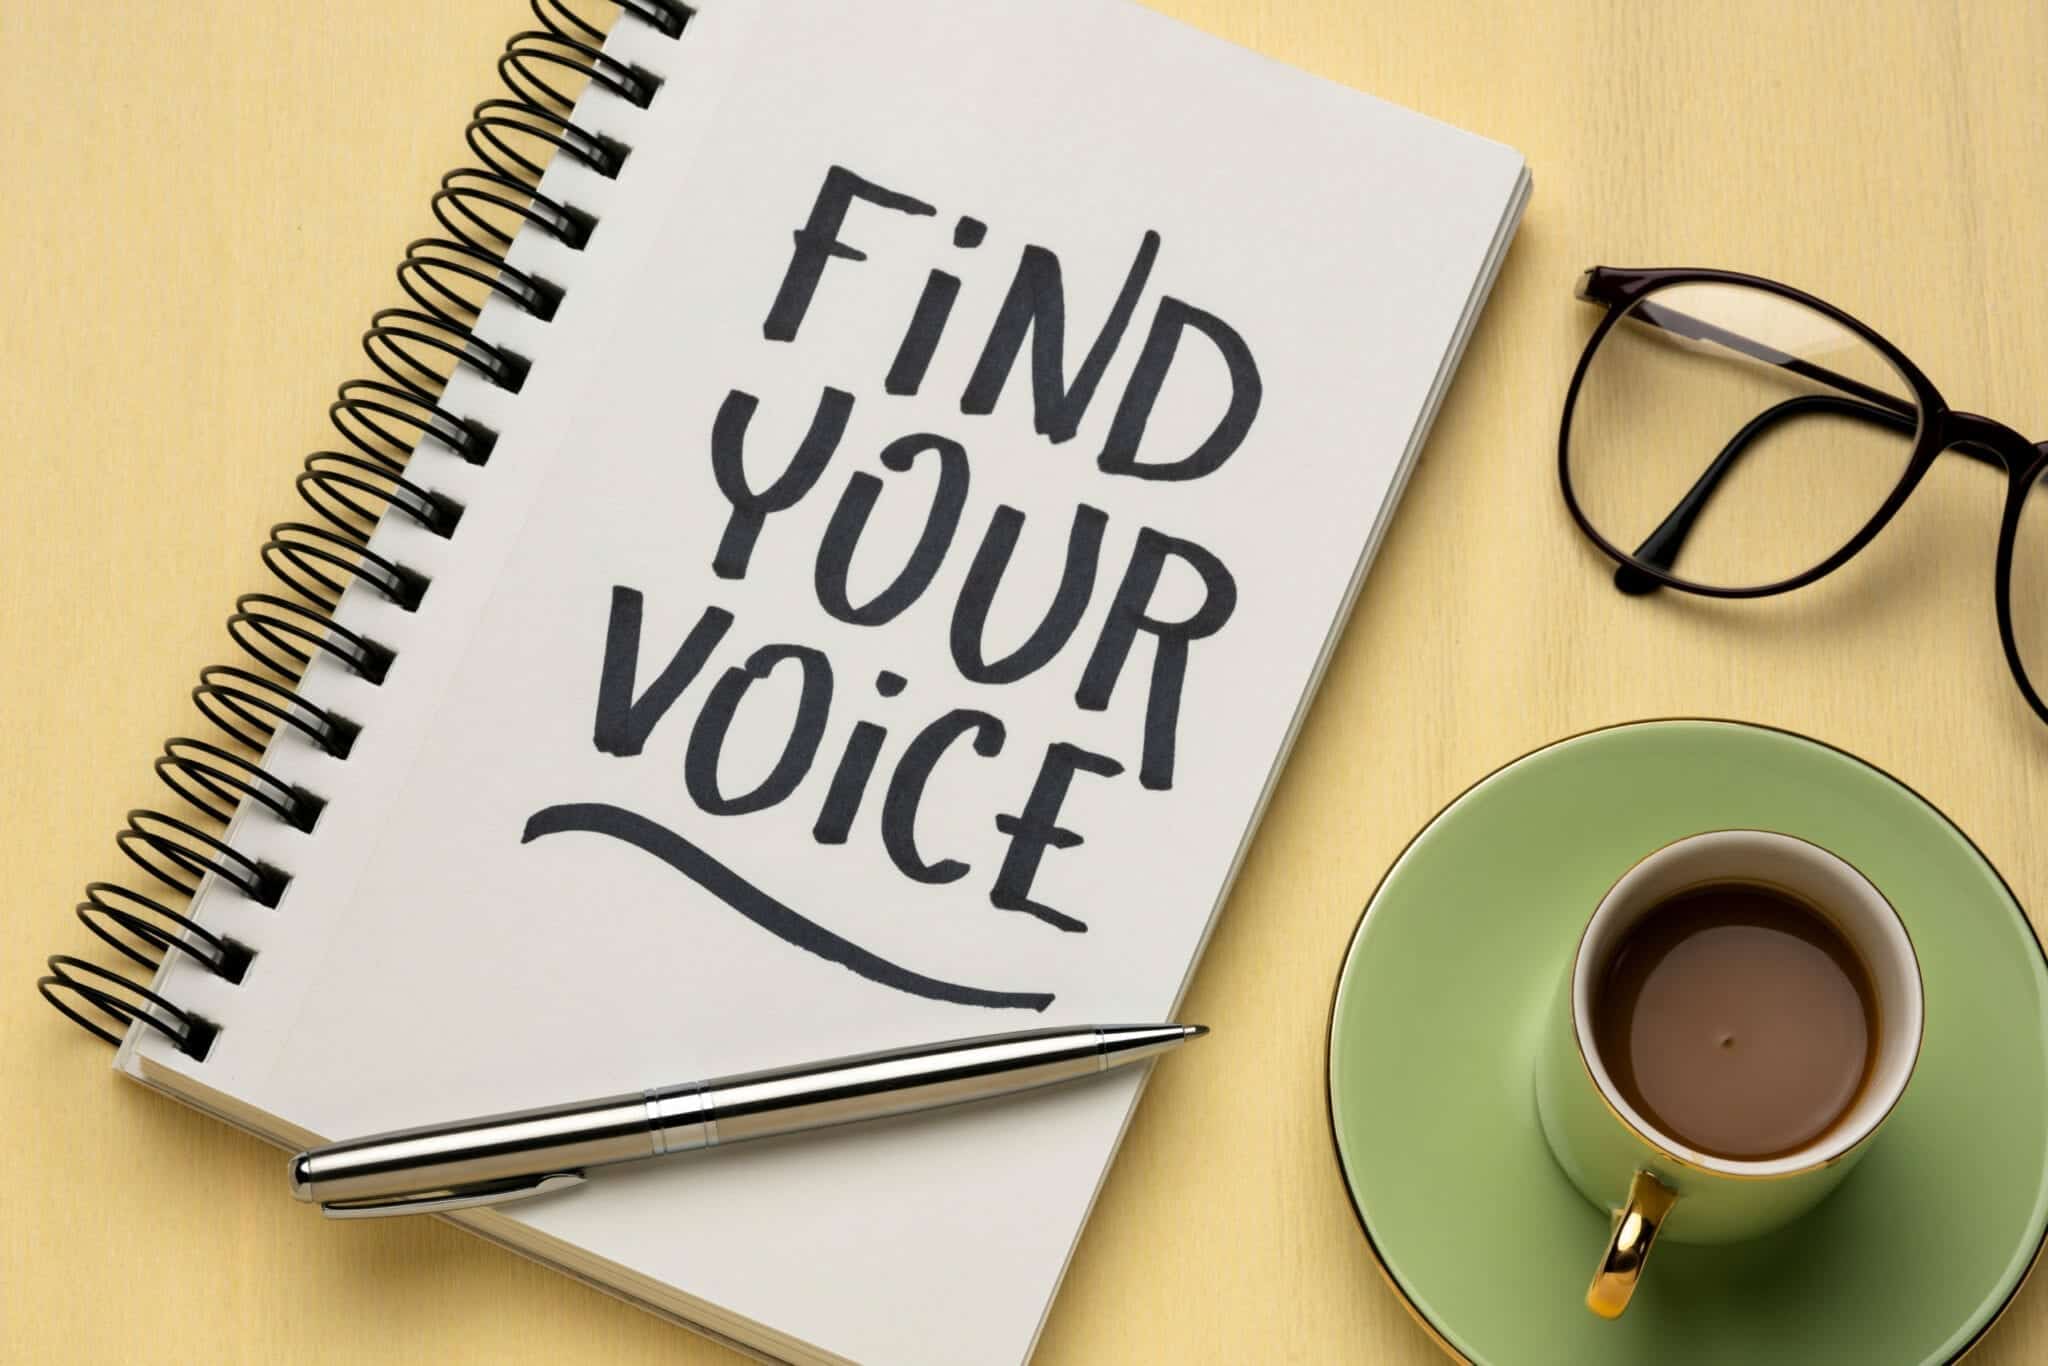 Easy steps to define and use your brand voice